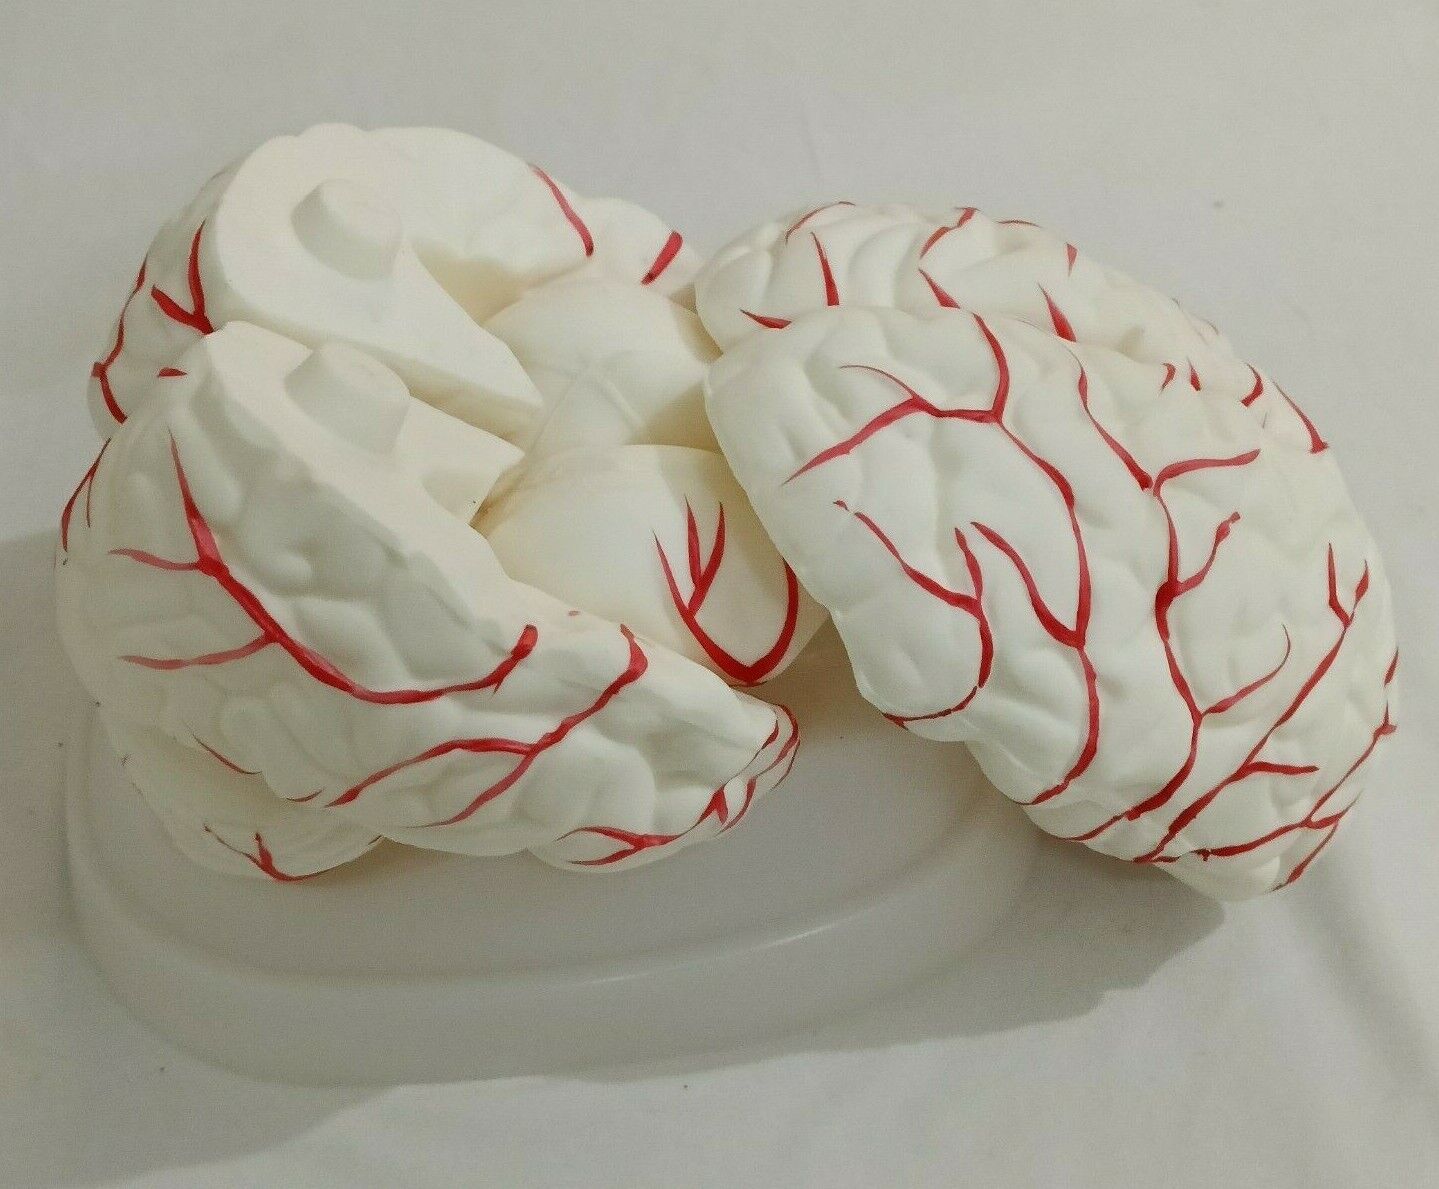 Brain with Arteries Anatomical Models